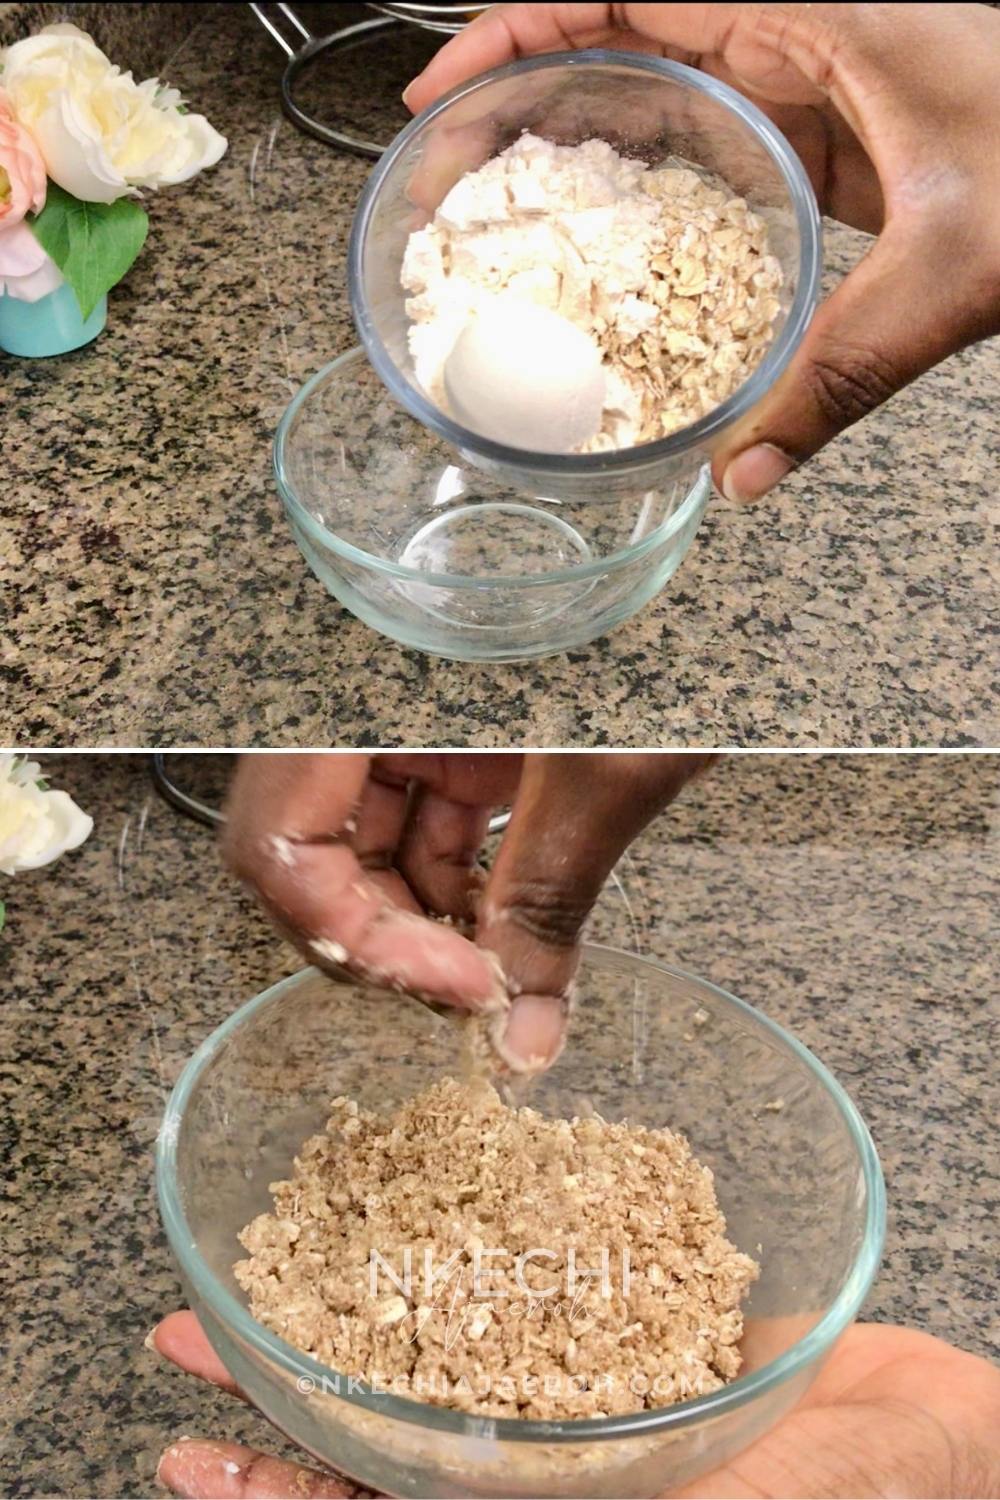 Make the streusel topping
You'll grab another bowl and add the streusel ingredients to it – flour, quick oats, coconut sugar, salt, and room-temperature plant butter. You can then combine them with a fork or your clean hands. The result should be coarse and crumbly.